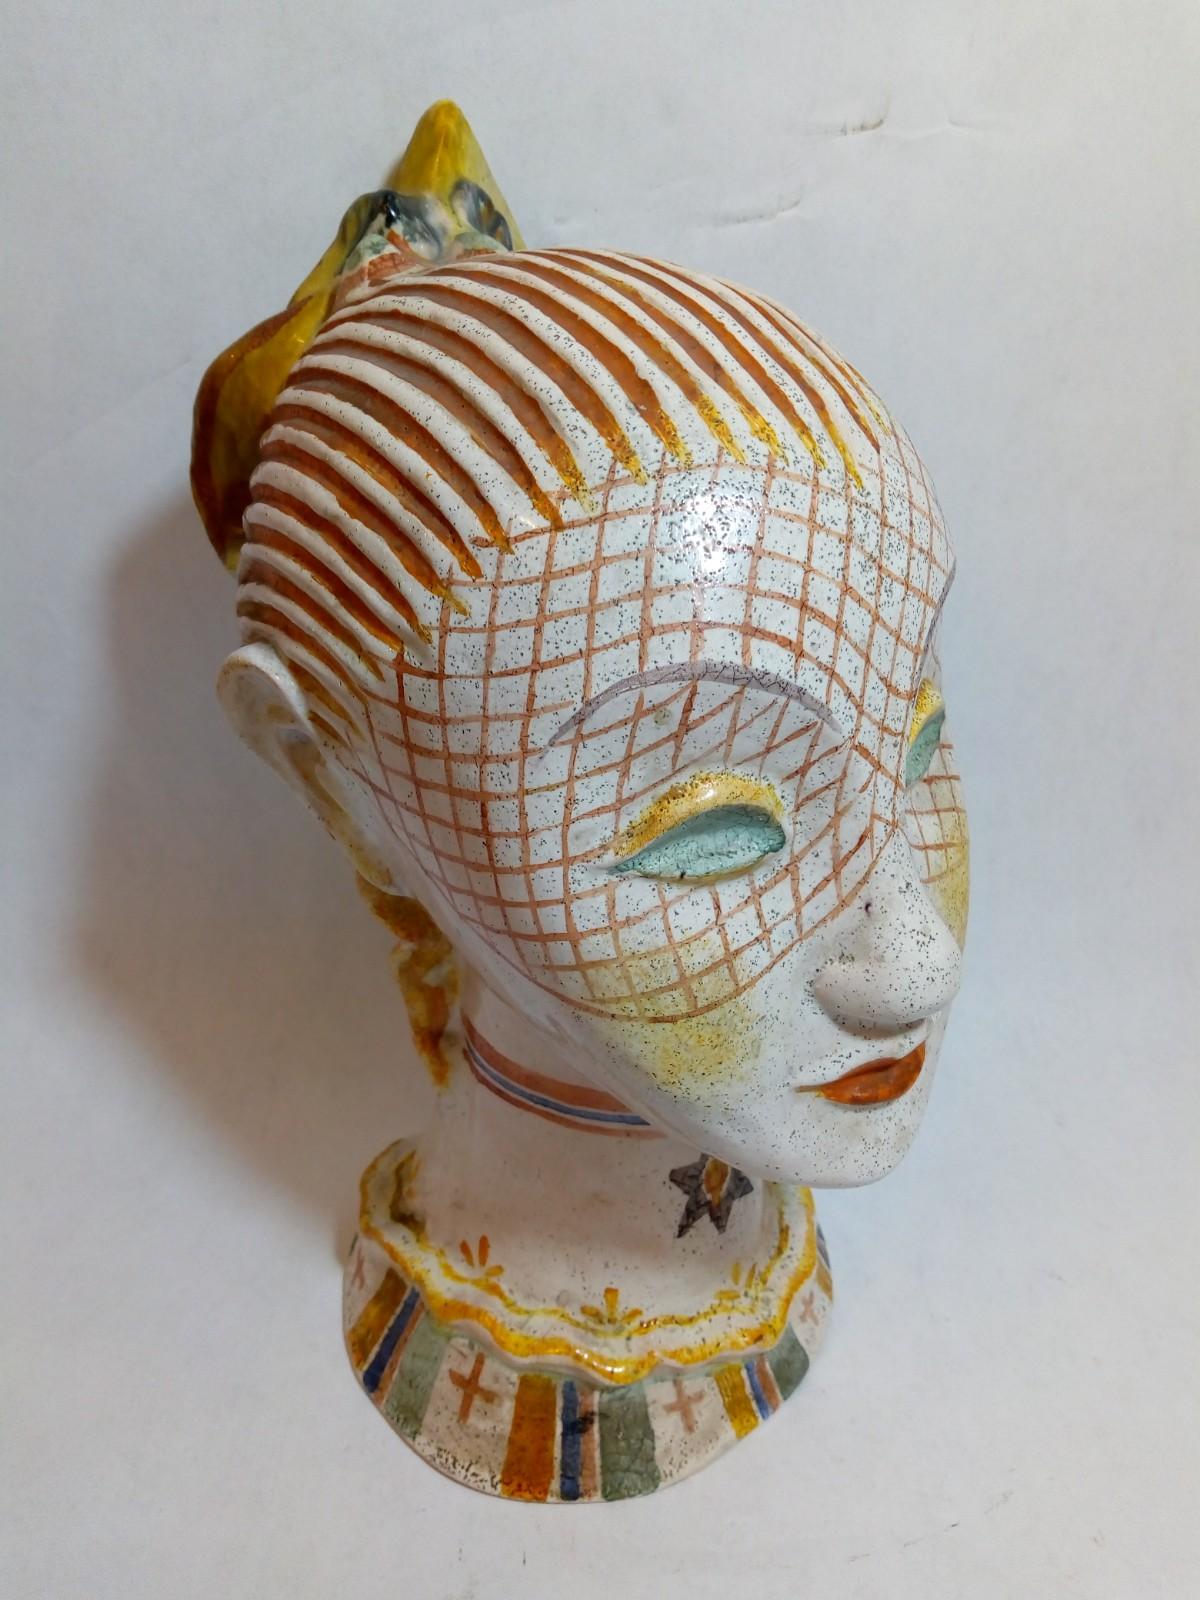 Austrian Glazed Ceramic Head of Woman with Painted Veil, Attributed to Vally Wieselthiel